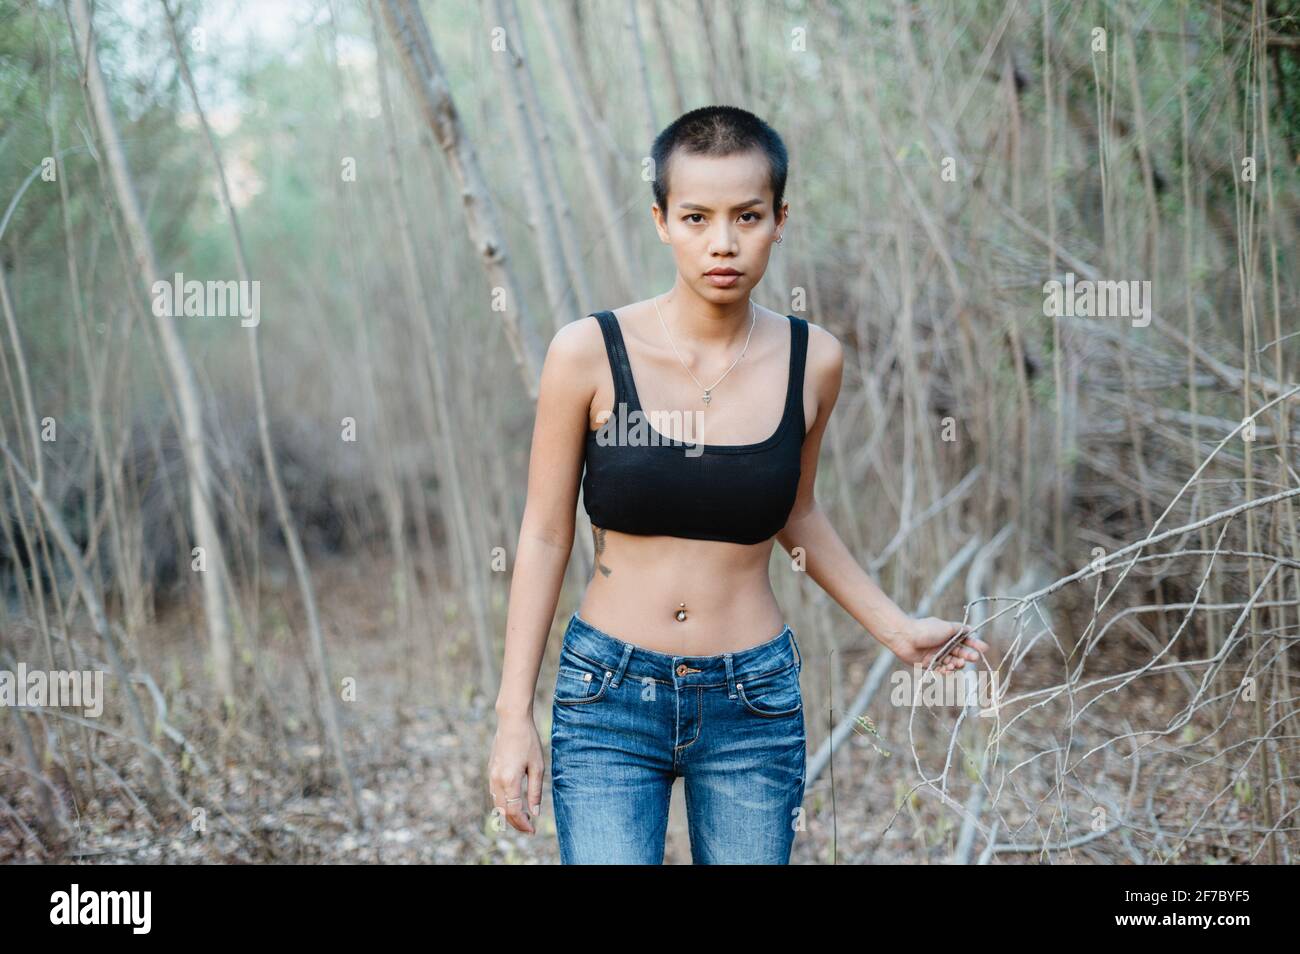 Portrait of a young Asian ethnicity woman with short hair in nature, wearing a sports bra, looking at the camera. She is surrounded by bushes. Stock Photo